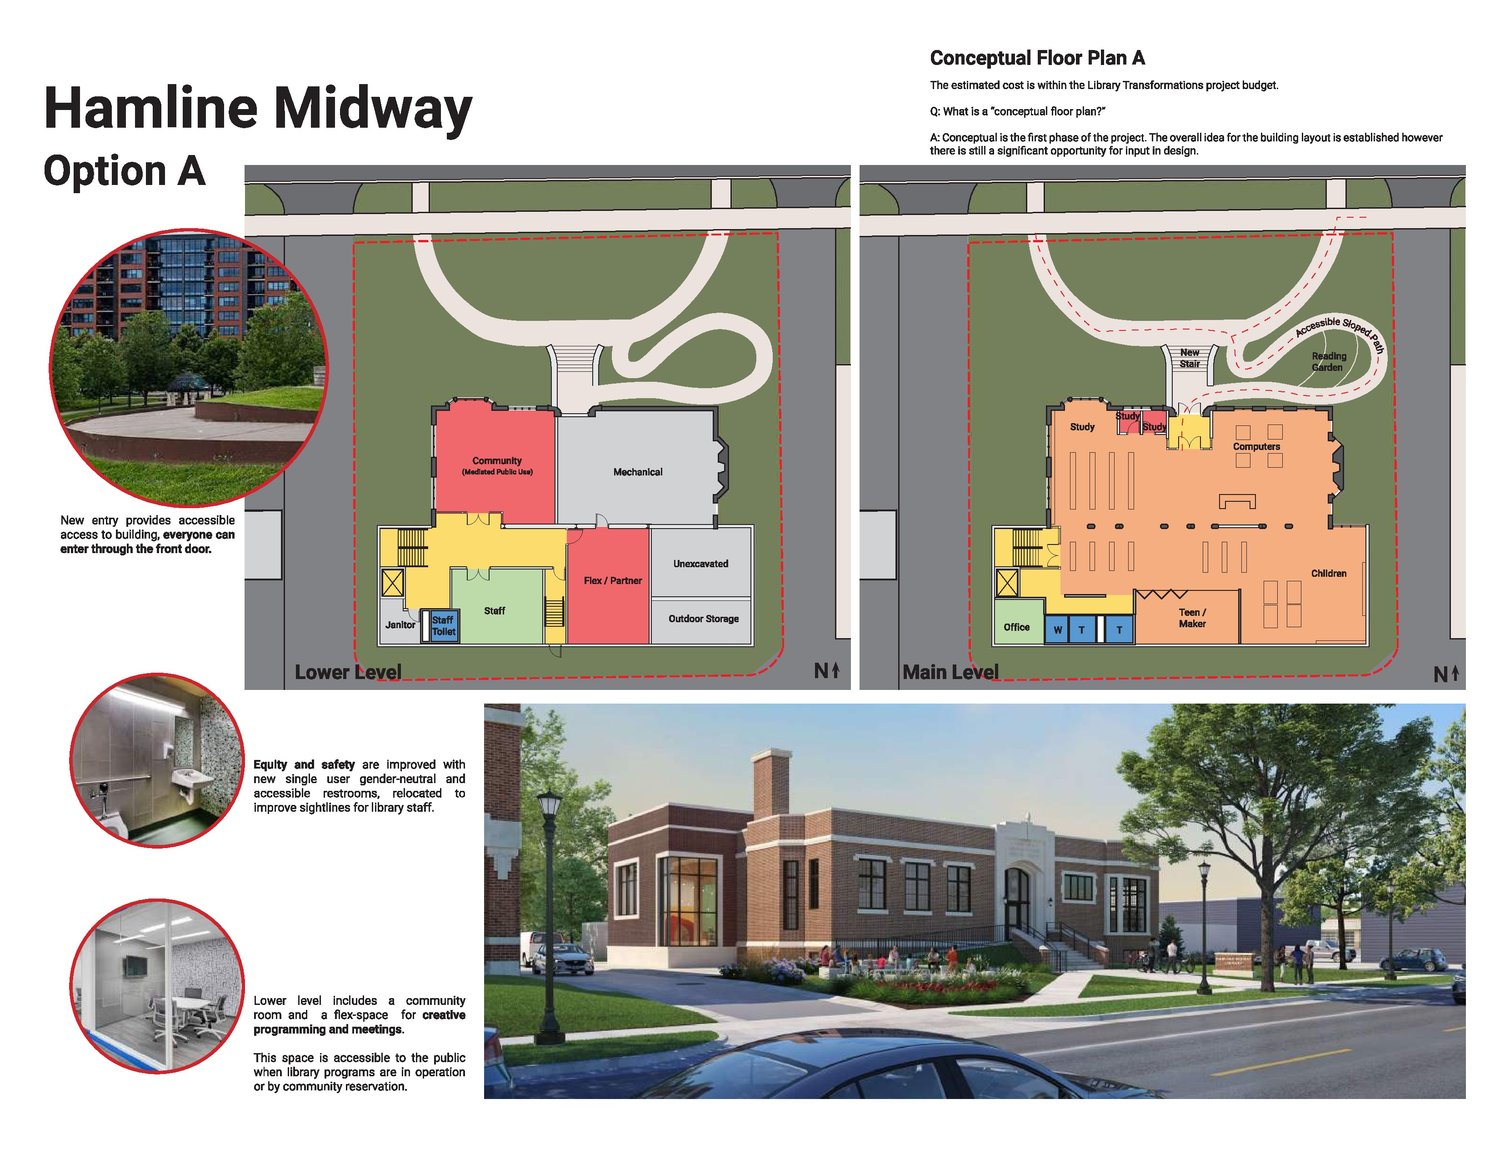 Option A for the Hamline-Midway library offers an alternative to demolition and shows an addition instead.